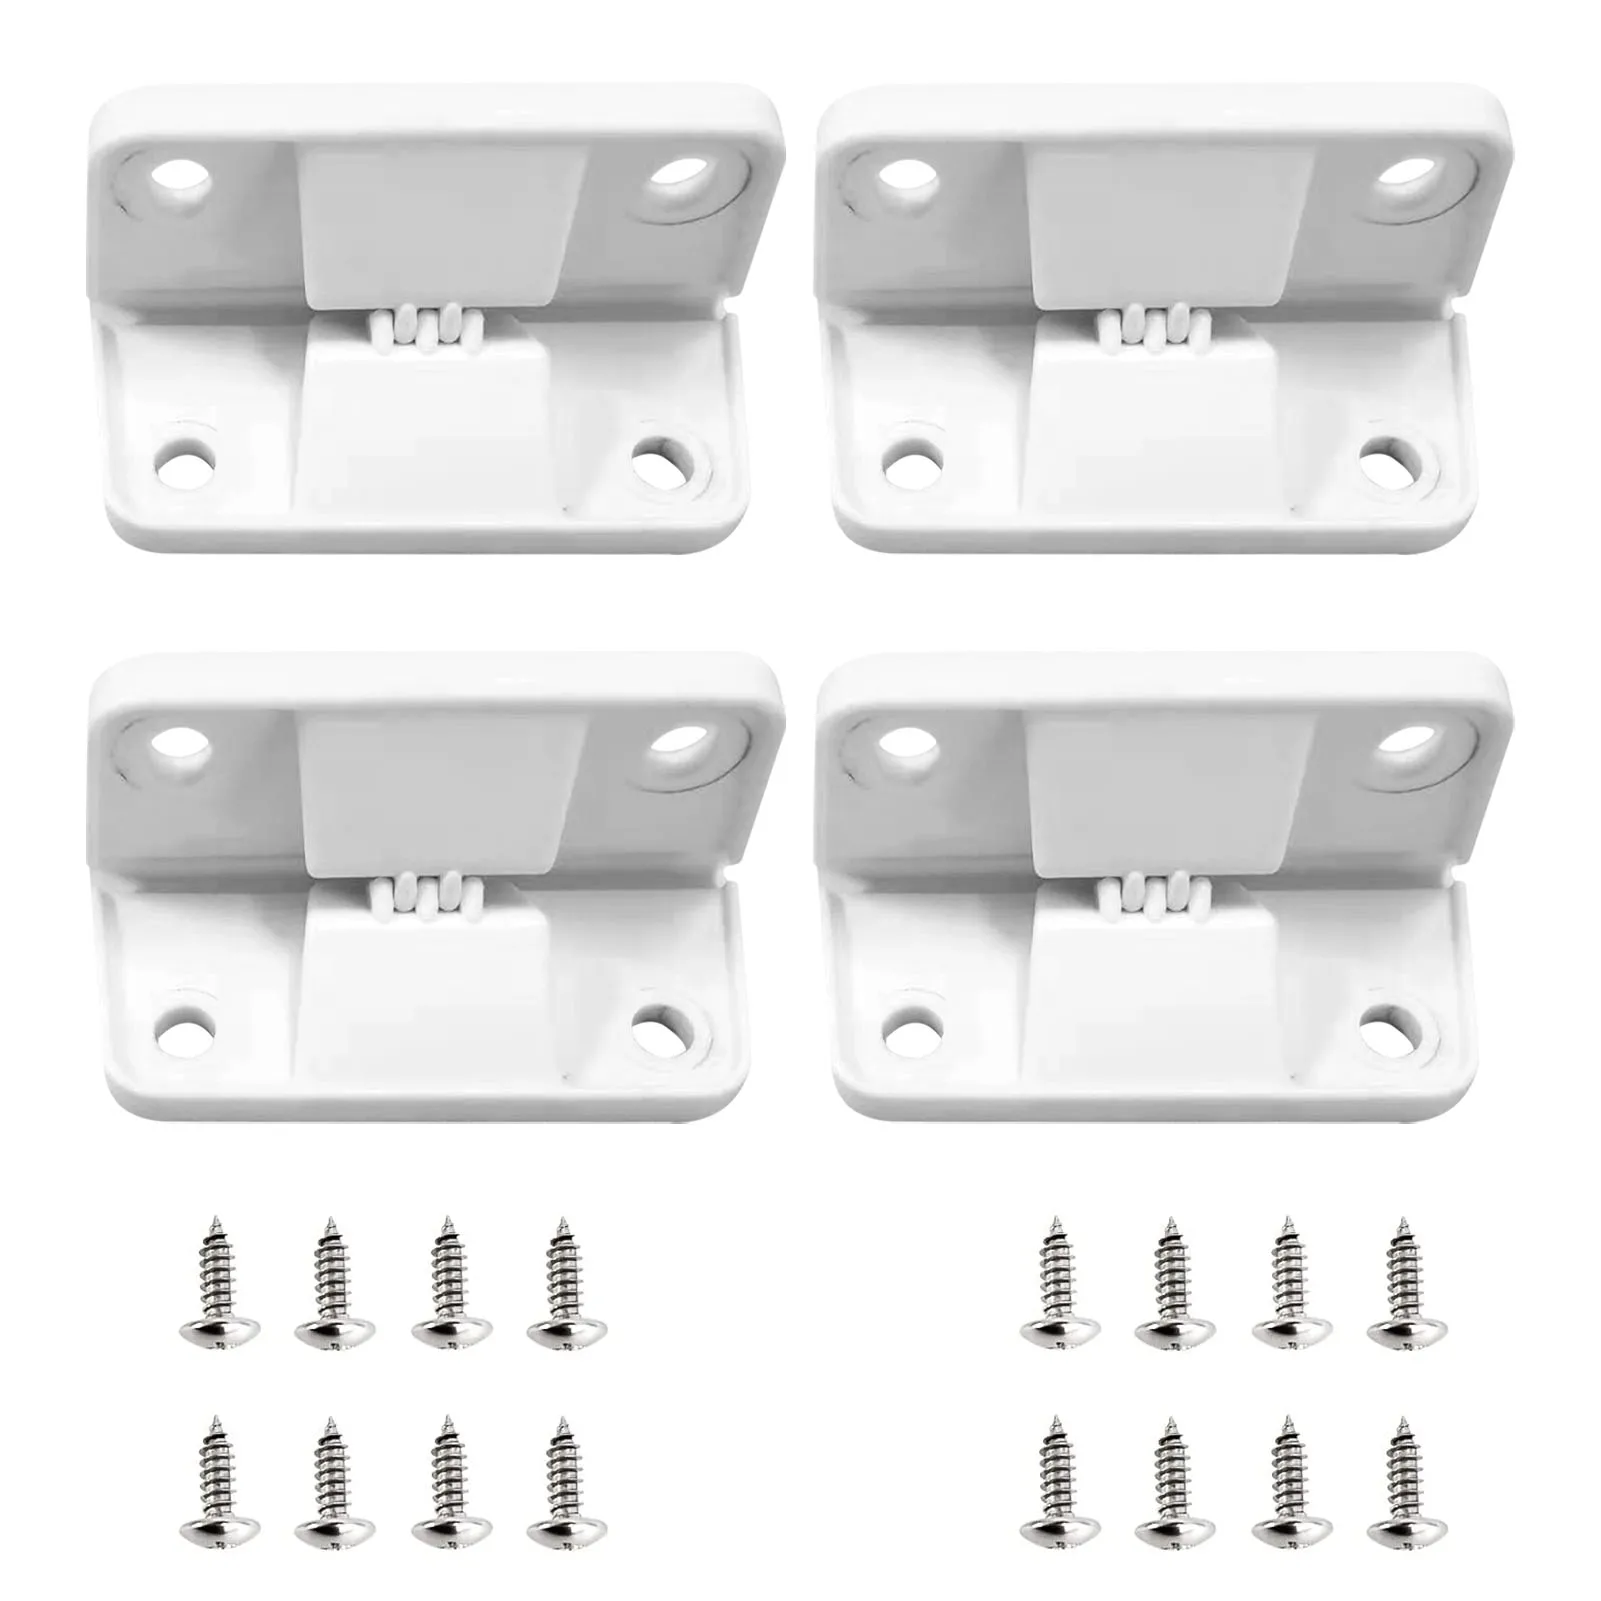 

Coolers Plastics Hinges And Screws Hinges Set Replacement For Colemans Coolers Hinges Kit With 16 Screws For Colemans Coolers